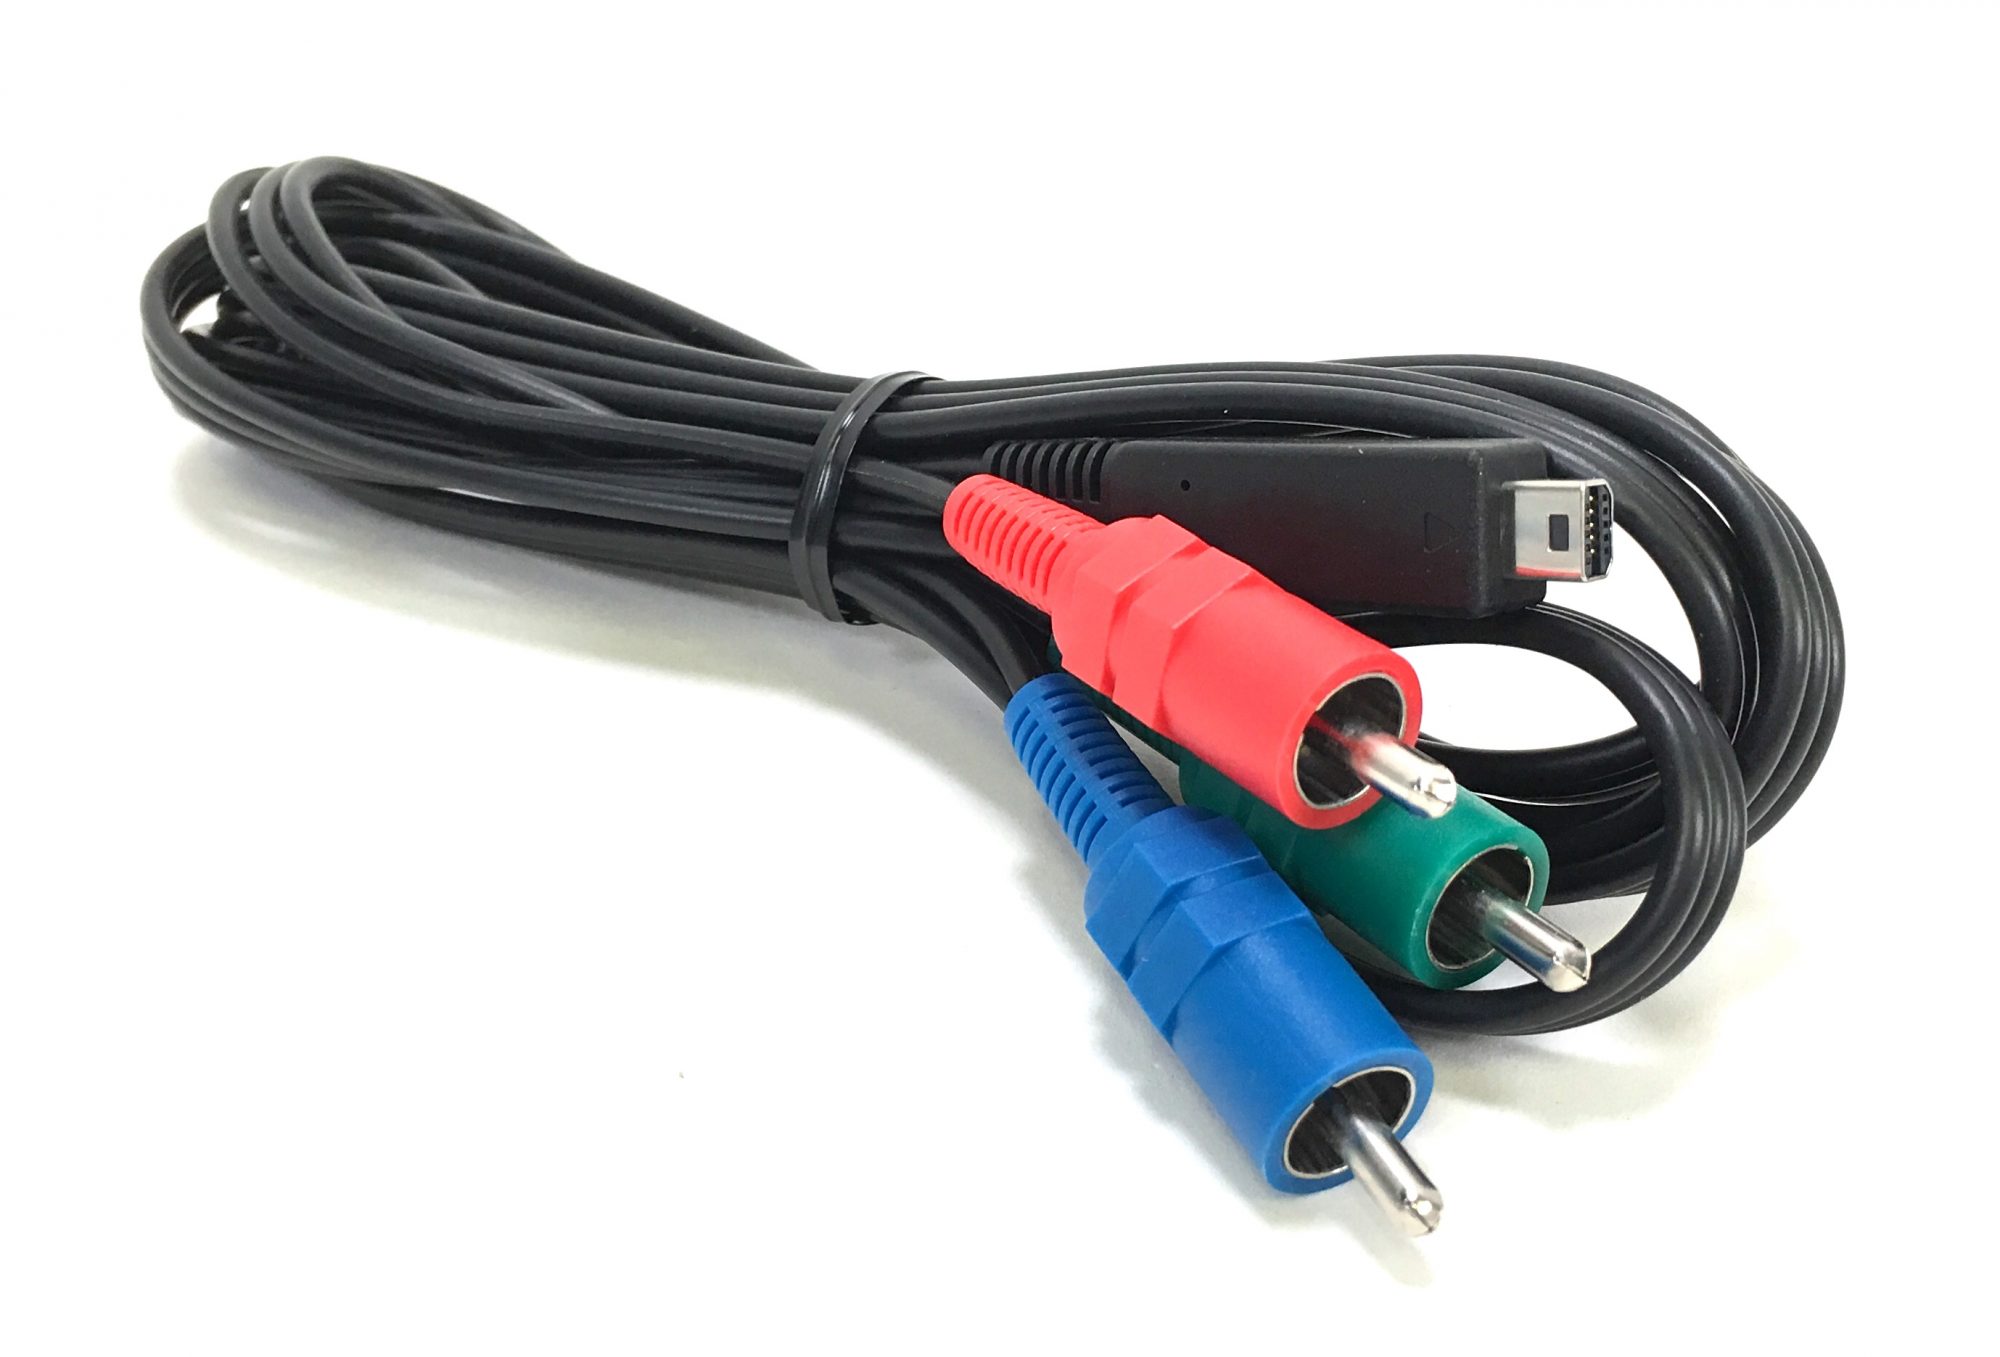 Original Component Video Cable that came with the Sony HVR-A1U camcorder. It is a genuine Sony part, sourced directly from Sony USA. Brand new factory fresh. Free Shipping.